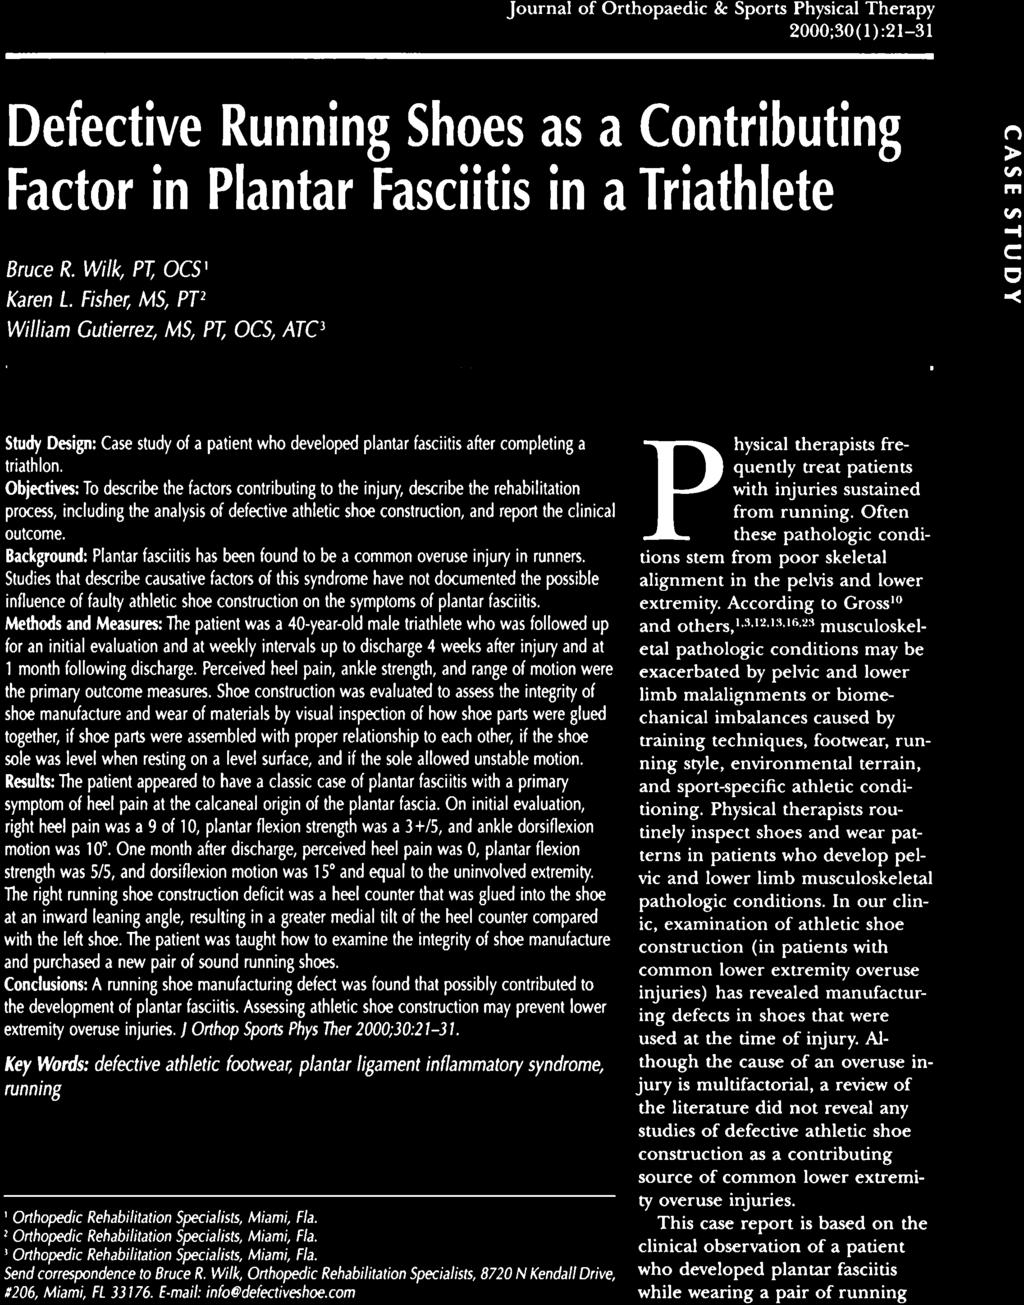 Journal of Orthopaedic & Sports Physical Therapy 2000;30(1):21-31 Defective Running Shoes as a Contributing Factor in Plantar Fasciitis in a Triathlete Bruce R. Wilk, P7; OCS1 Karen 1.